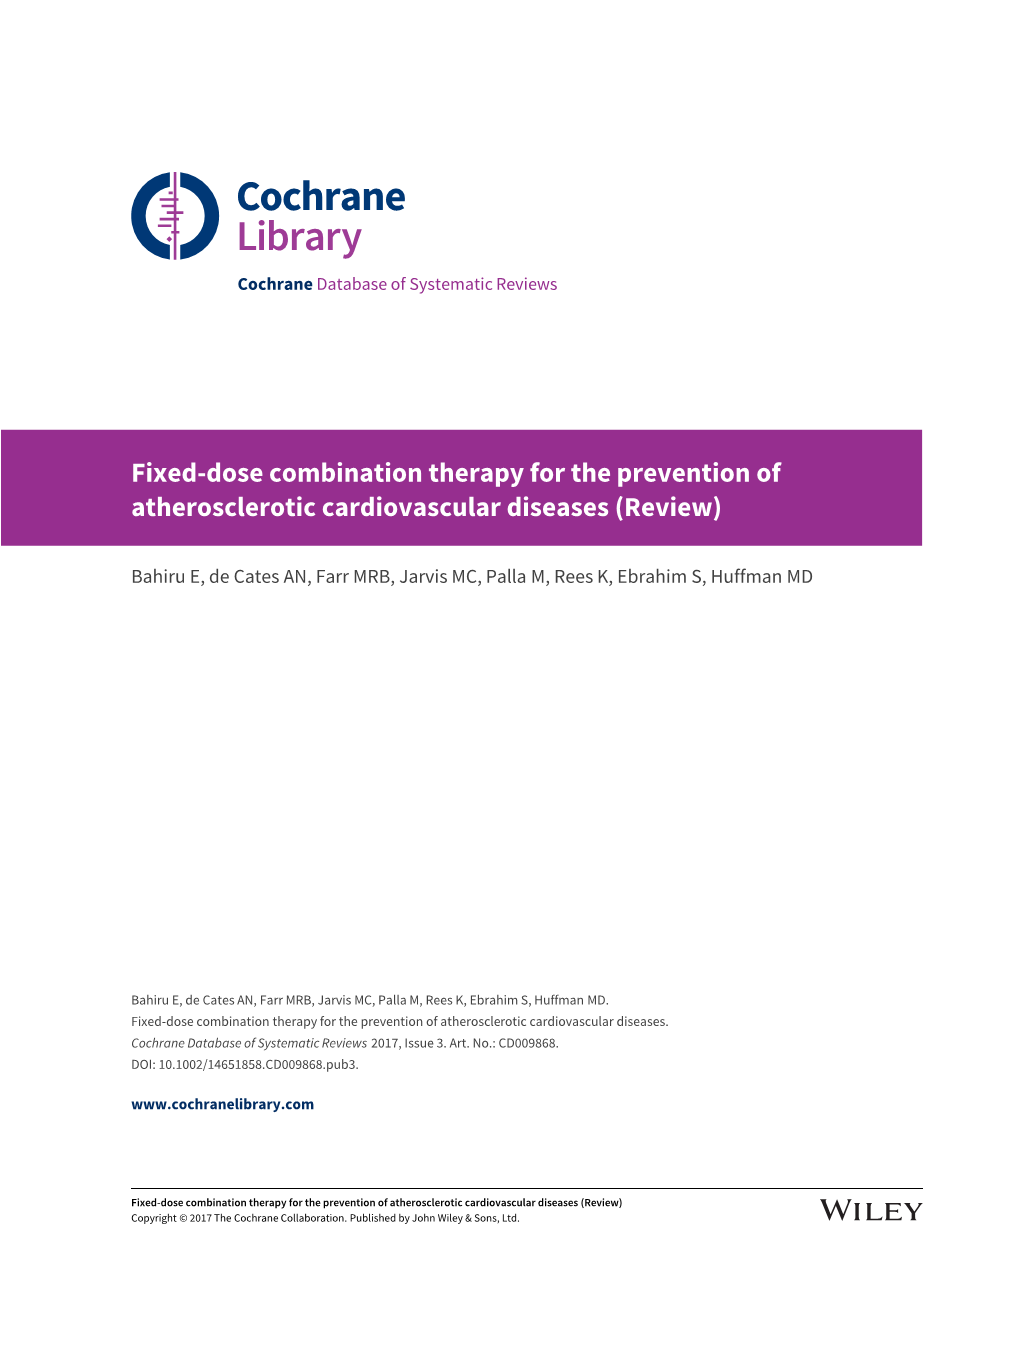 Fixed-Dose Combination Therapy for the Prevention of Atherosclerotic Cardiovascular Diseases (Review)